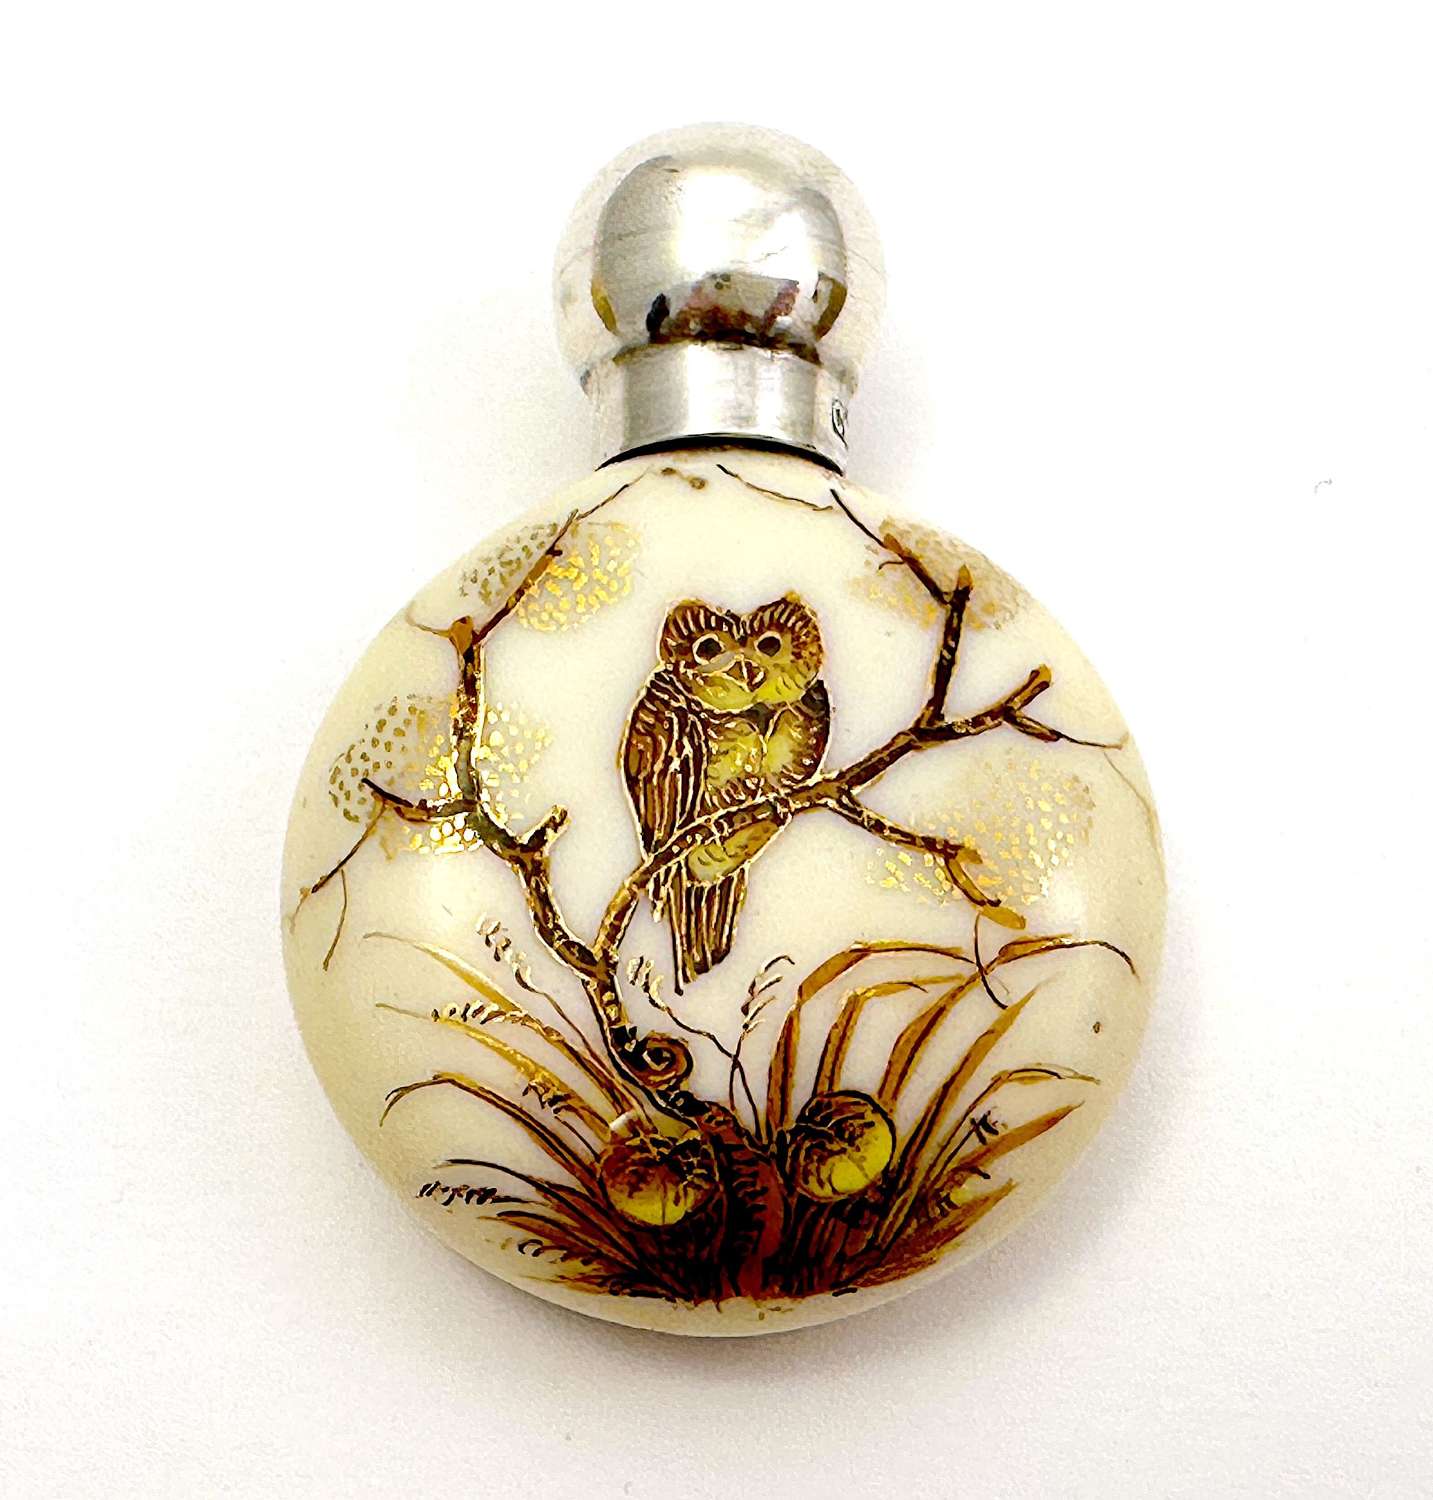 Antique Porcelain and Silver Perfume Bottle Depicting an Owl